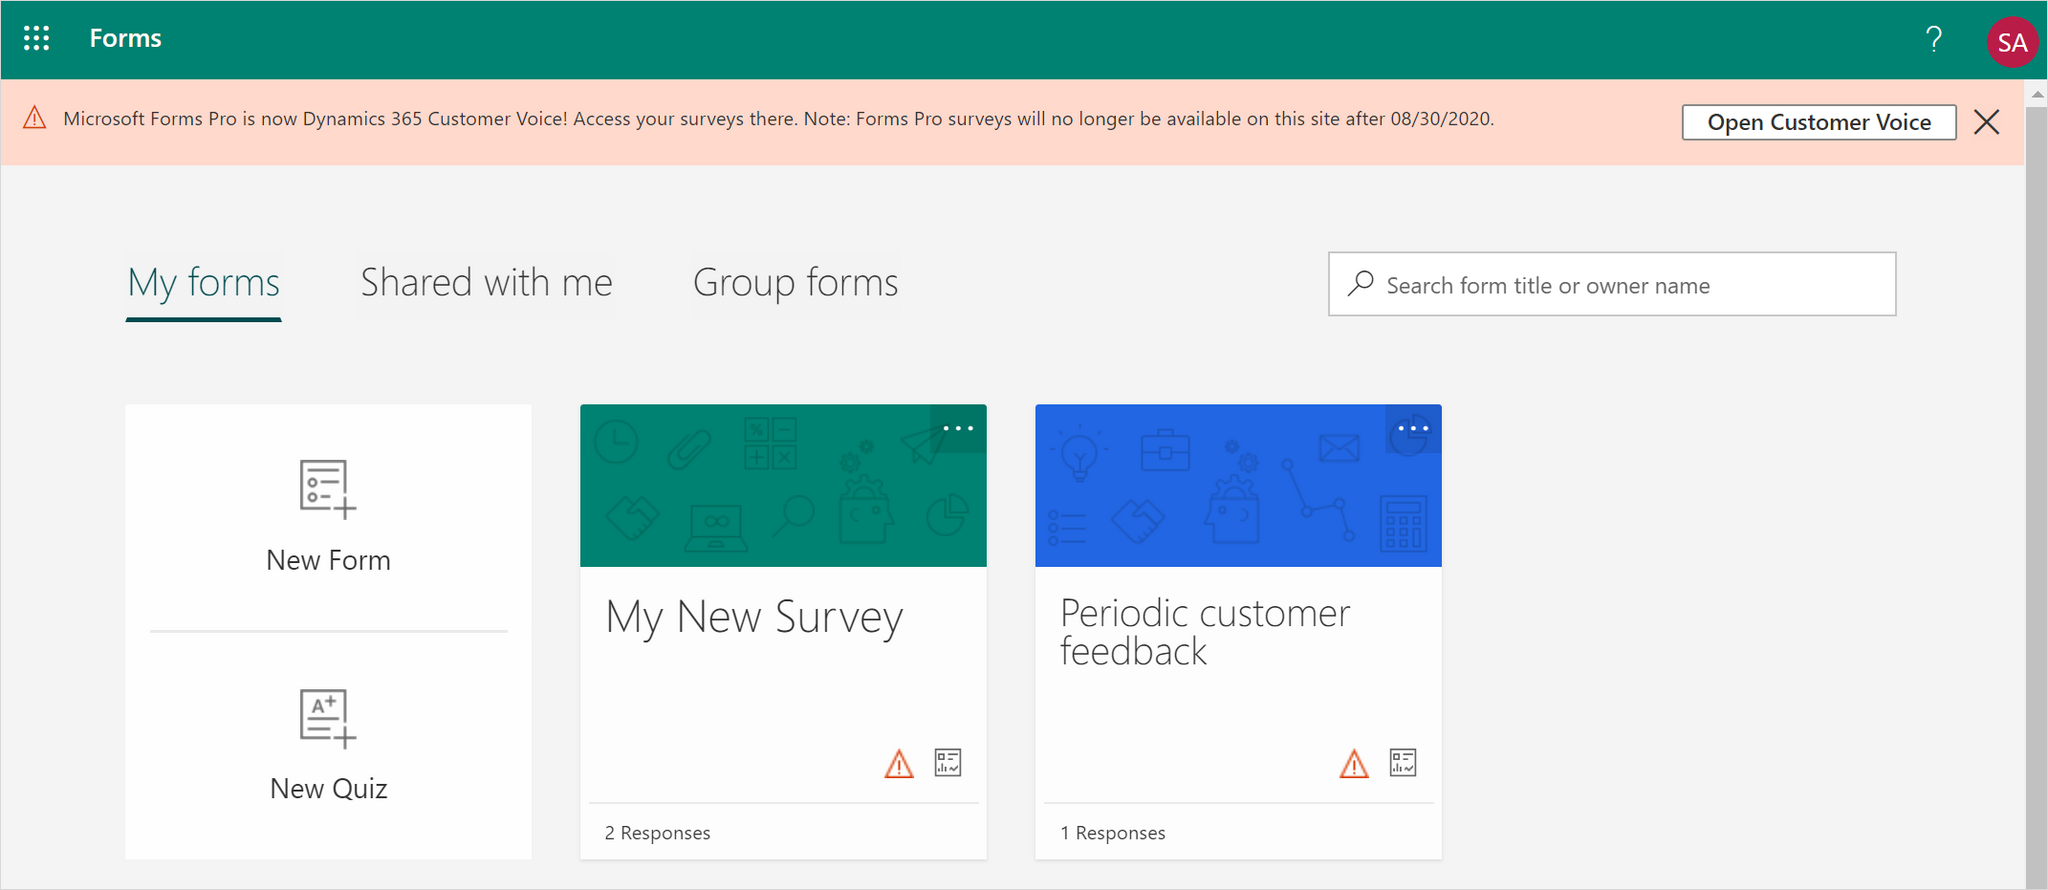 microsoft forms pro vs forms: Get to Know Which is Right for You